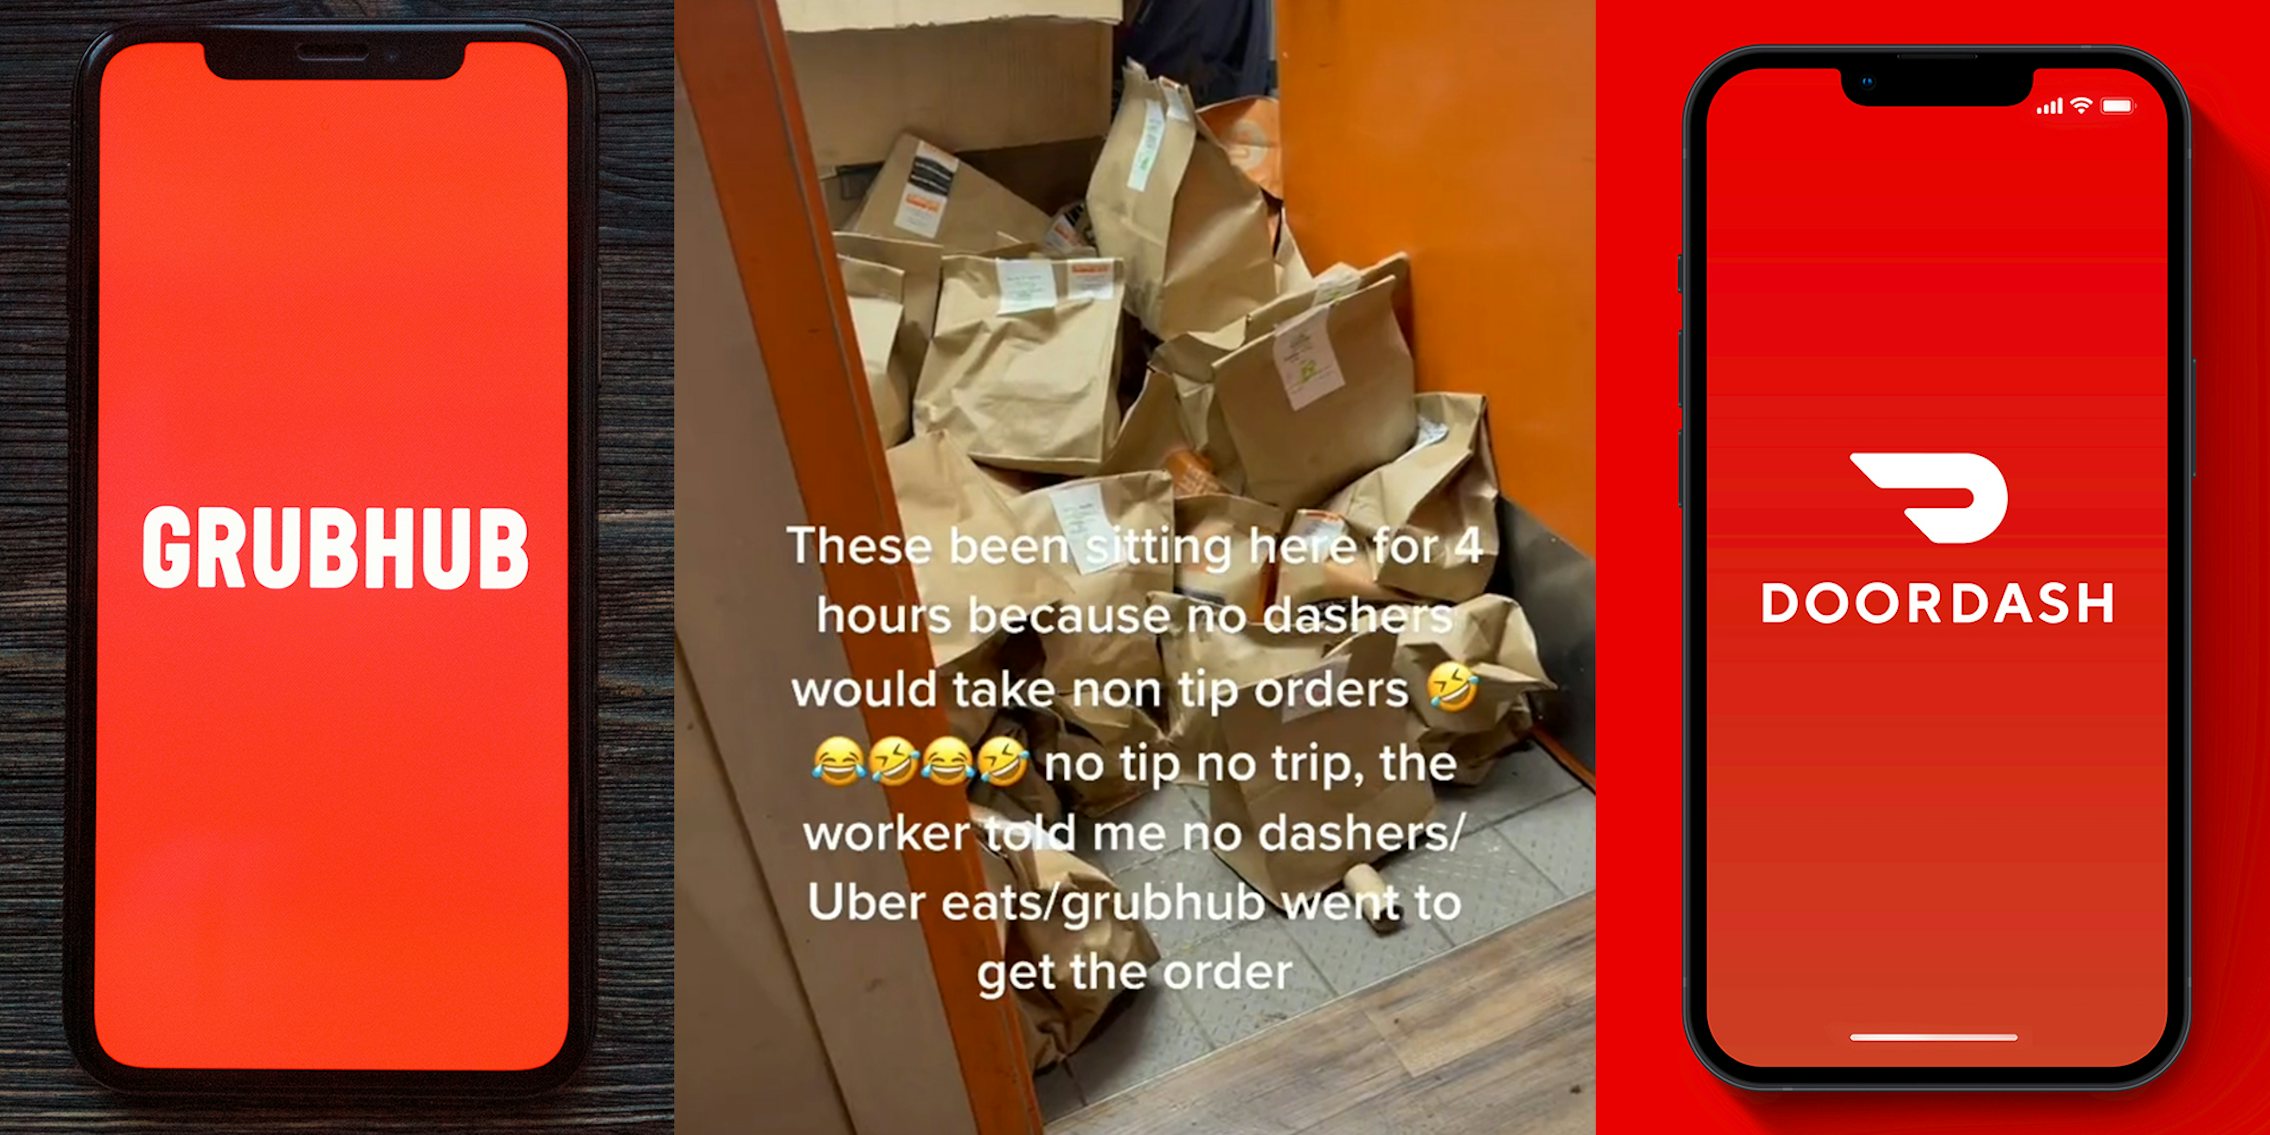 Grubhub app on phone (l) closet with undelivered orders and caption 'These been sitting here for 4 hours because no dashers would take non tip orders. no tip no trip, the worker told me no dashers/uber eats/grubhub went to get the order' (c) doordash app on phone (r)